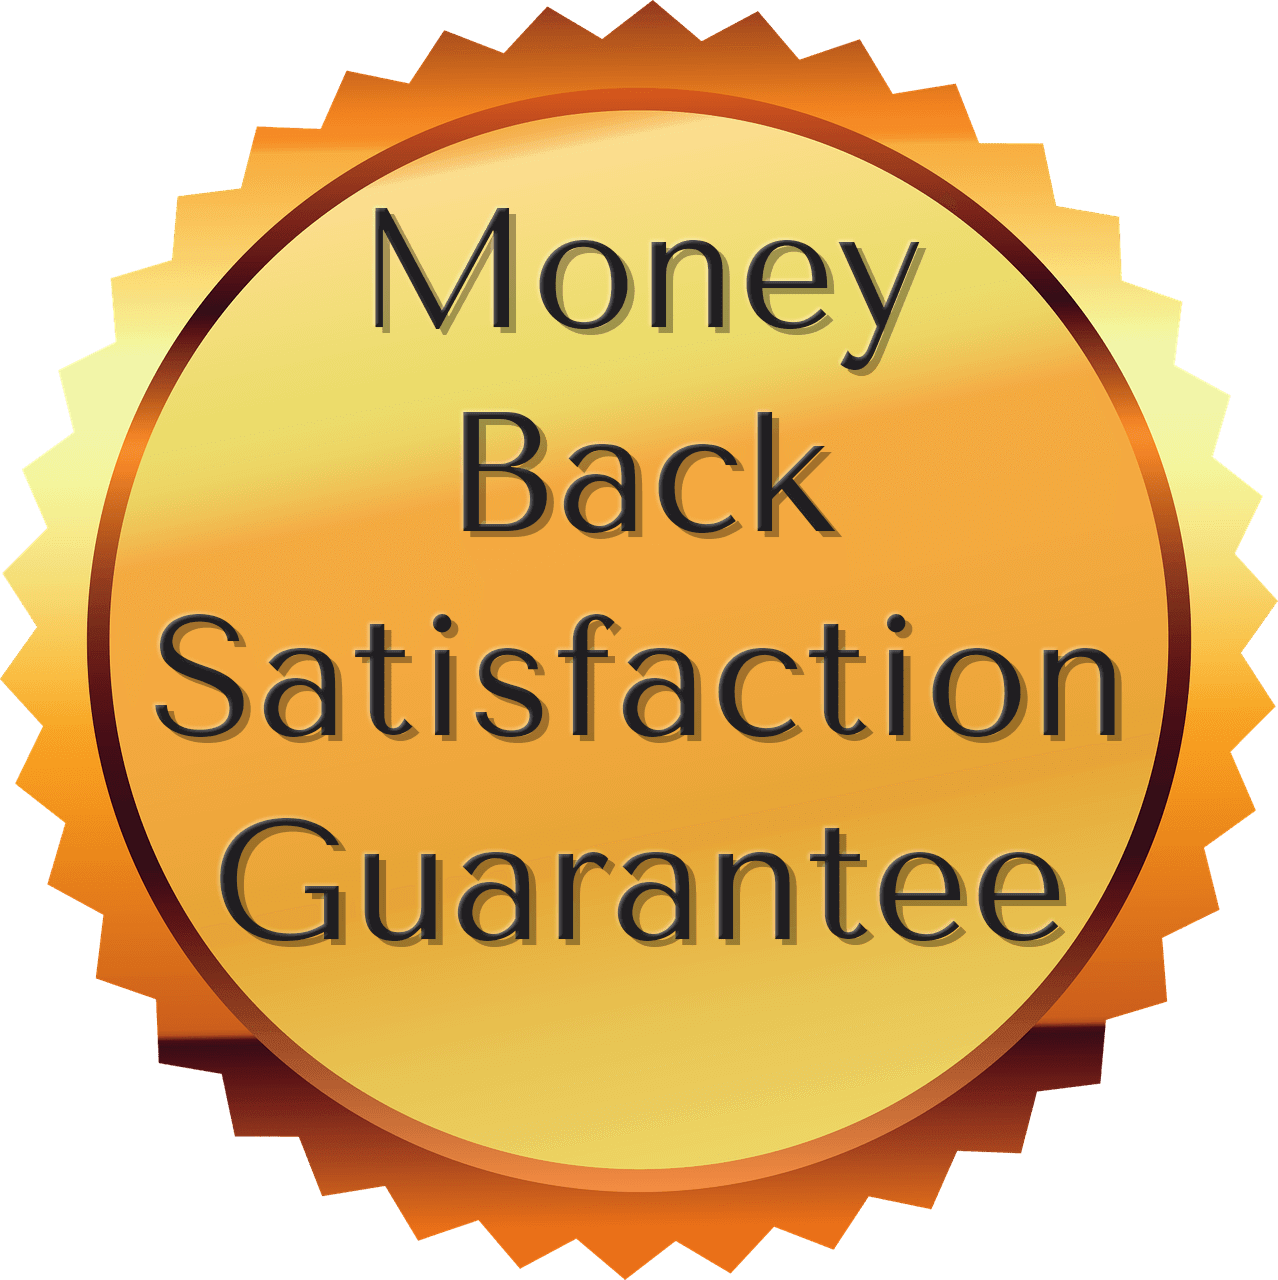 An image of a seal that reads "Money Back Satisfaction Guarantee".